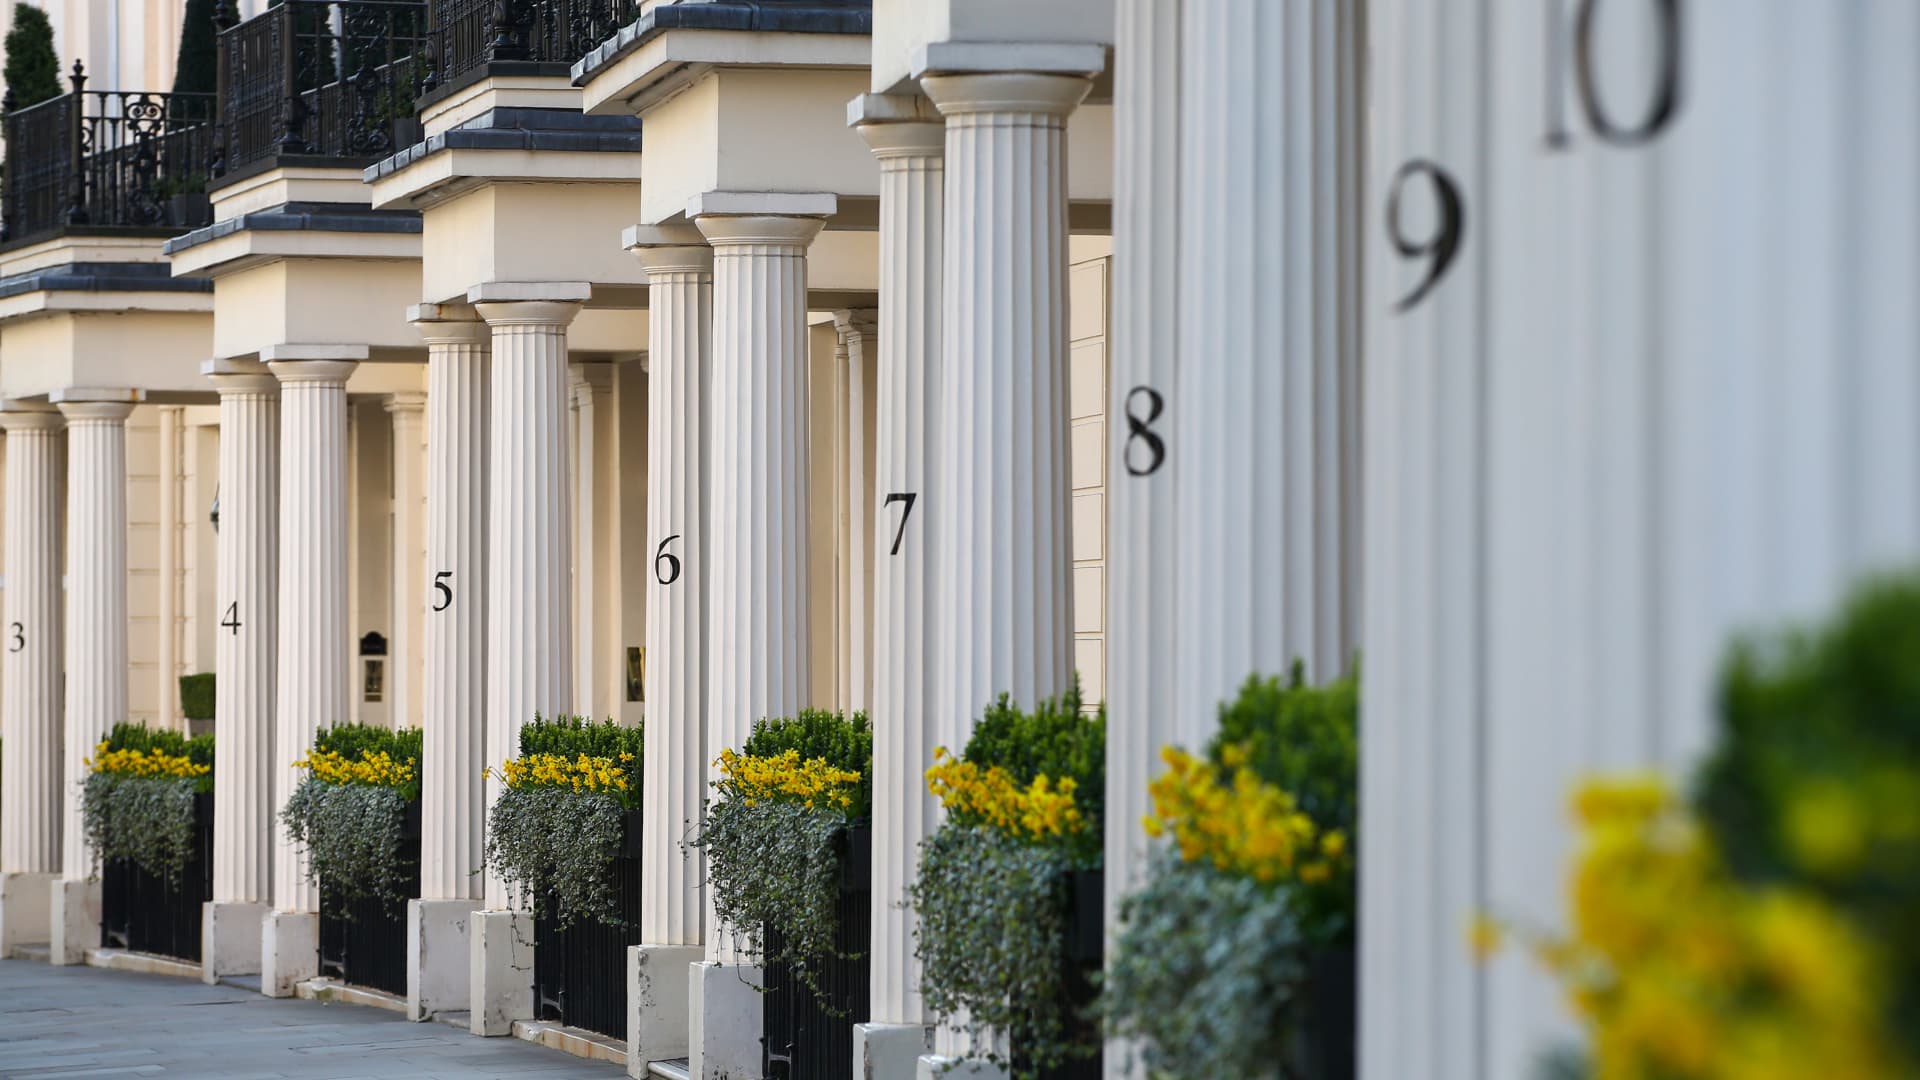 London's luxury home sellers turn to WhatsApp as private sales surge